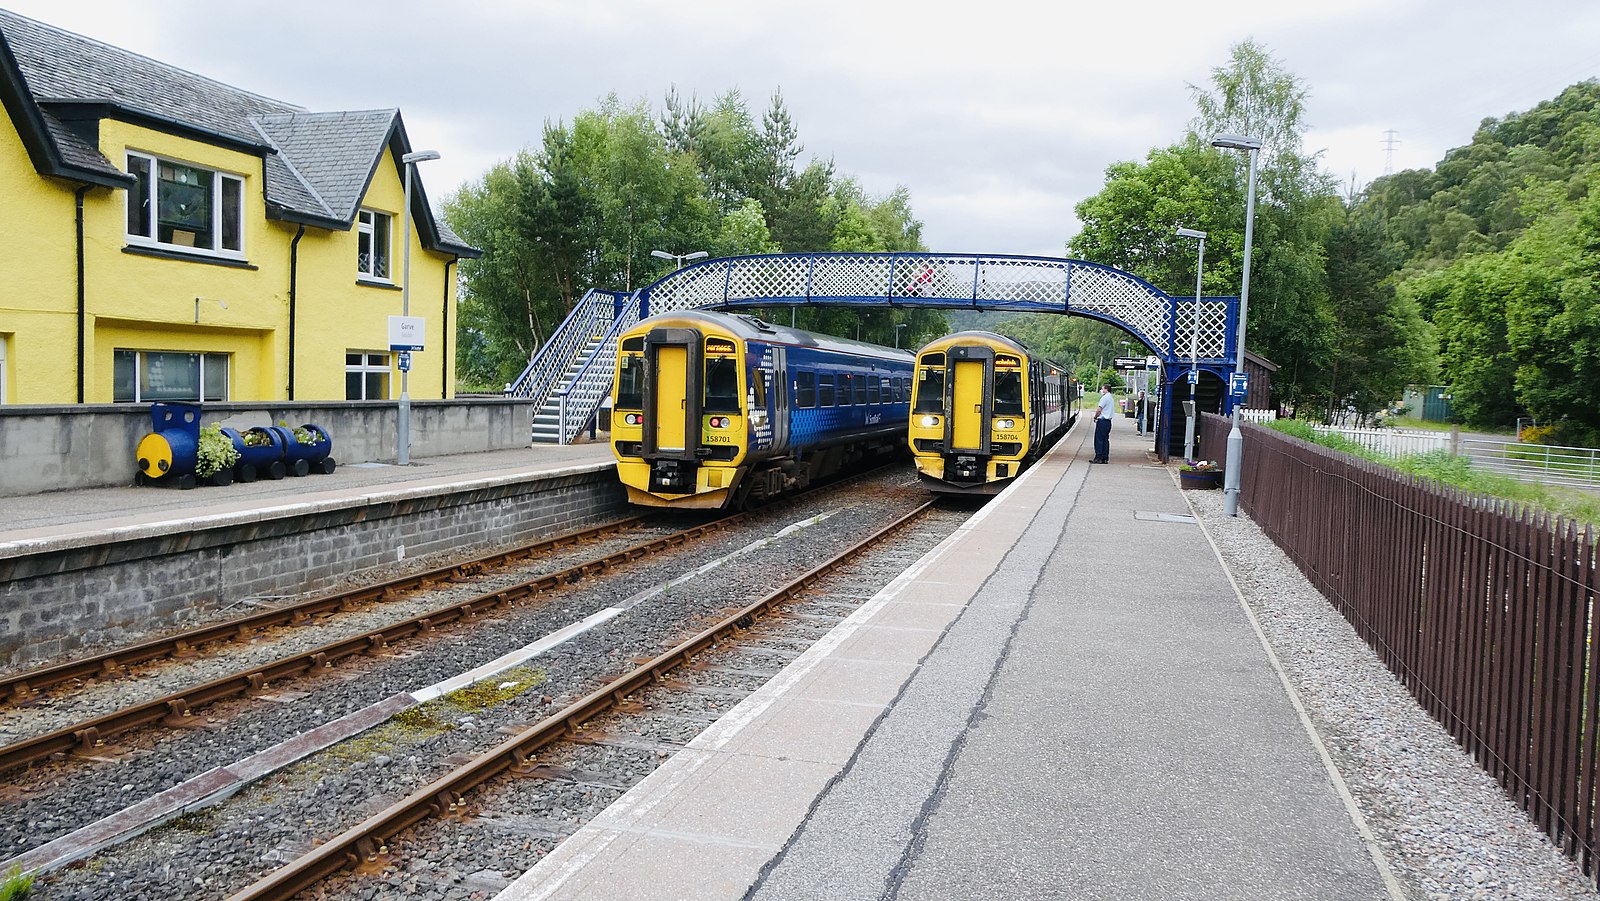 ScotRail trains pull into and out of a station in rural Scotland. There are two tracks with a train on each, with an pedestrian walkway overhead.